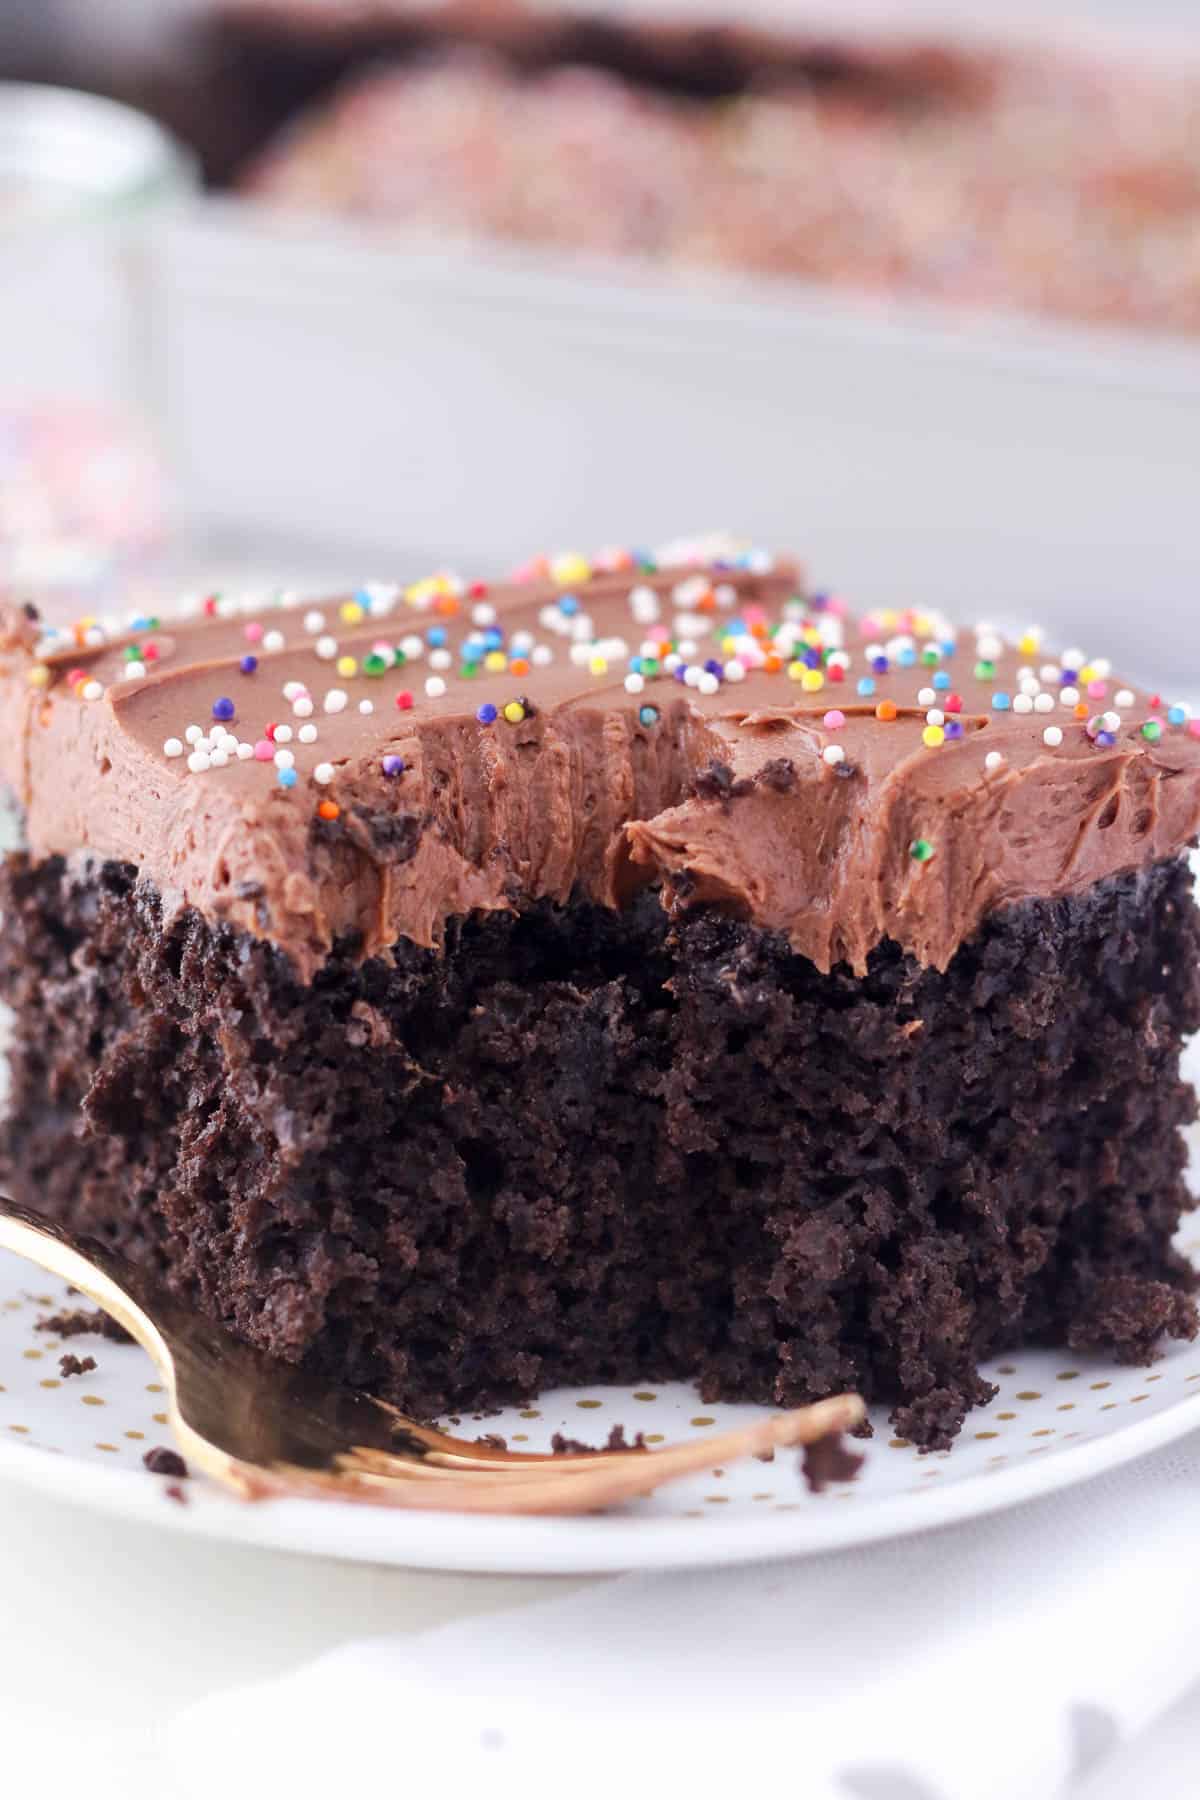 A slice of frosted chocolate cake topped with rainbow sprinkles on a white plate, with a forkful missing.